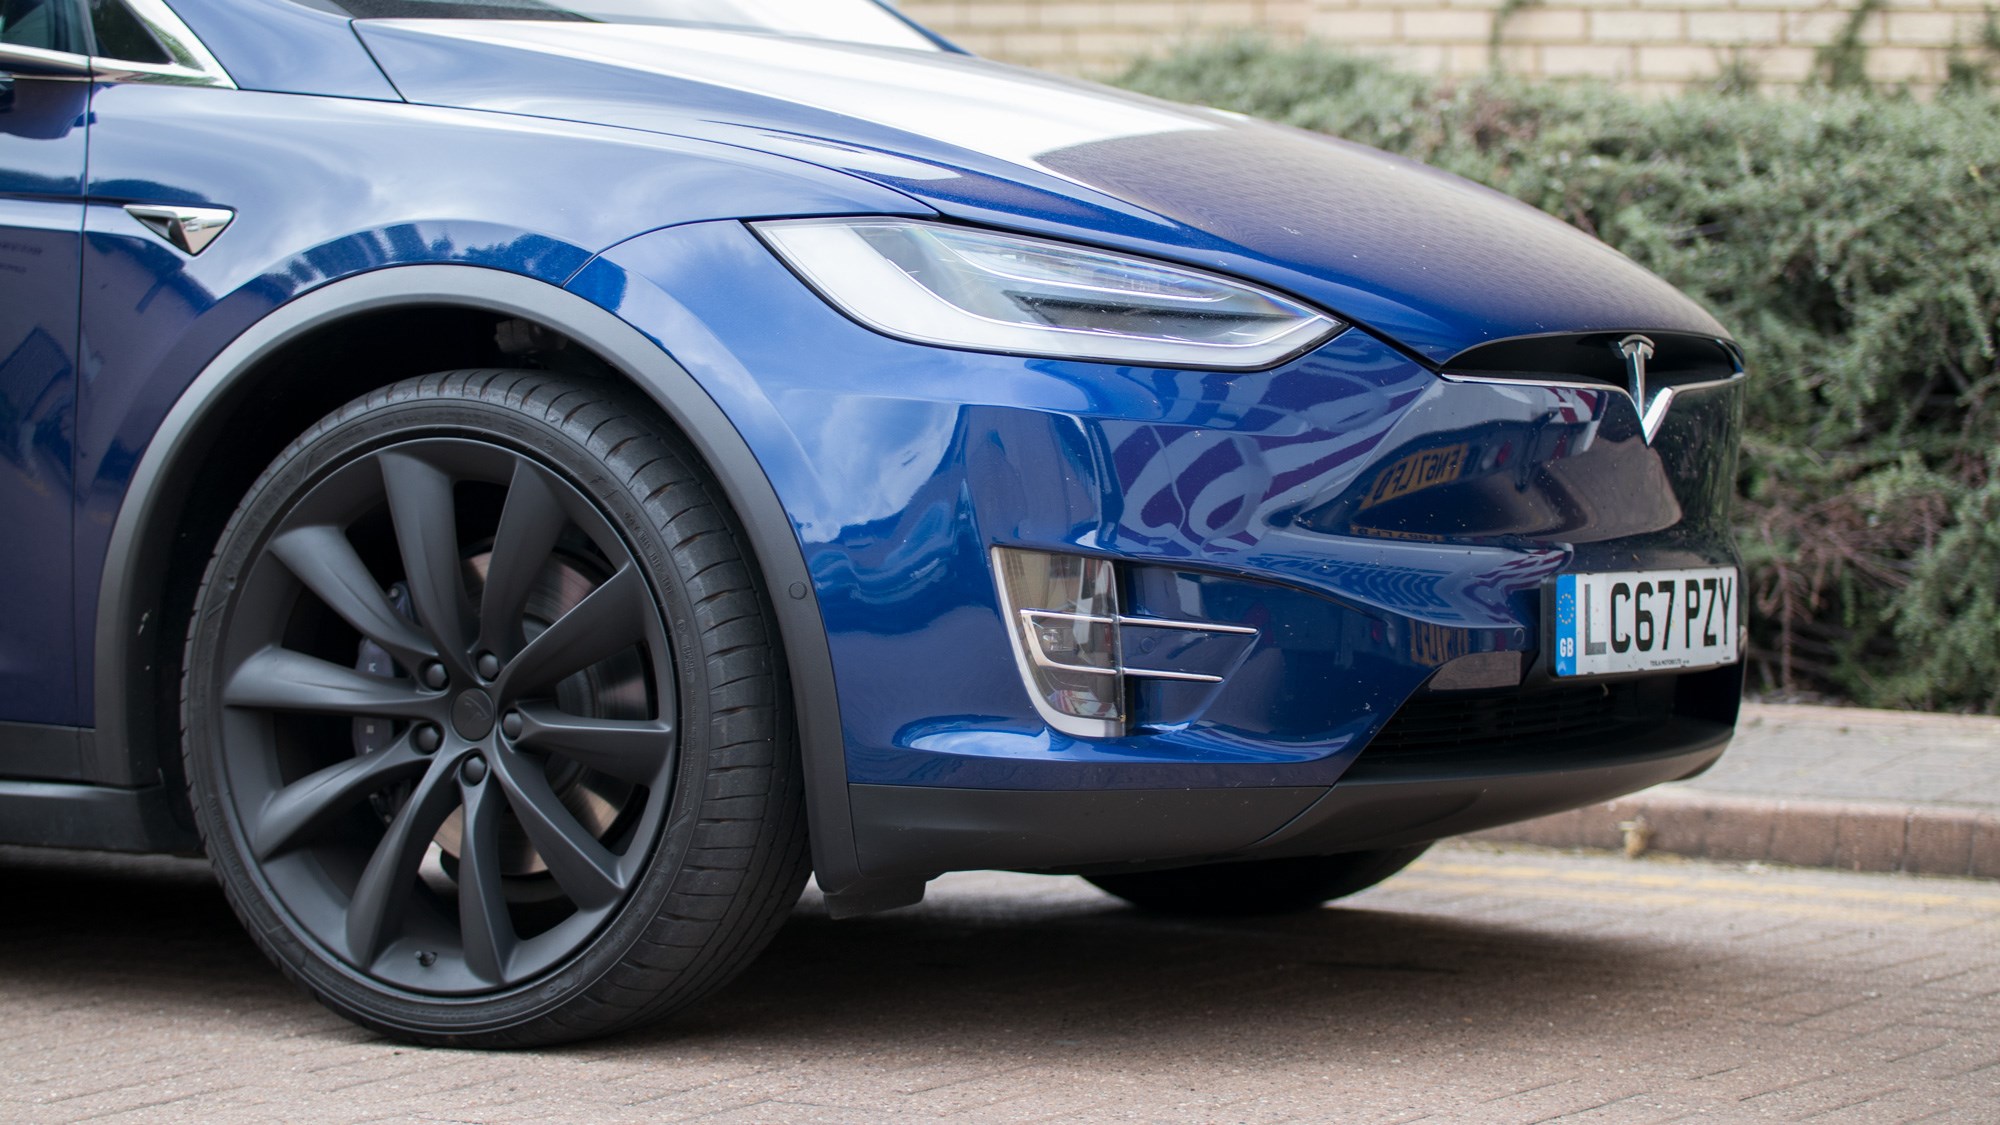 Tesla Model X - front wheel and grille-less face